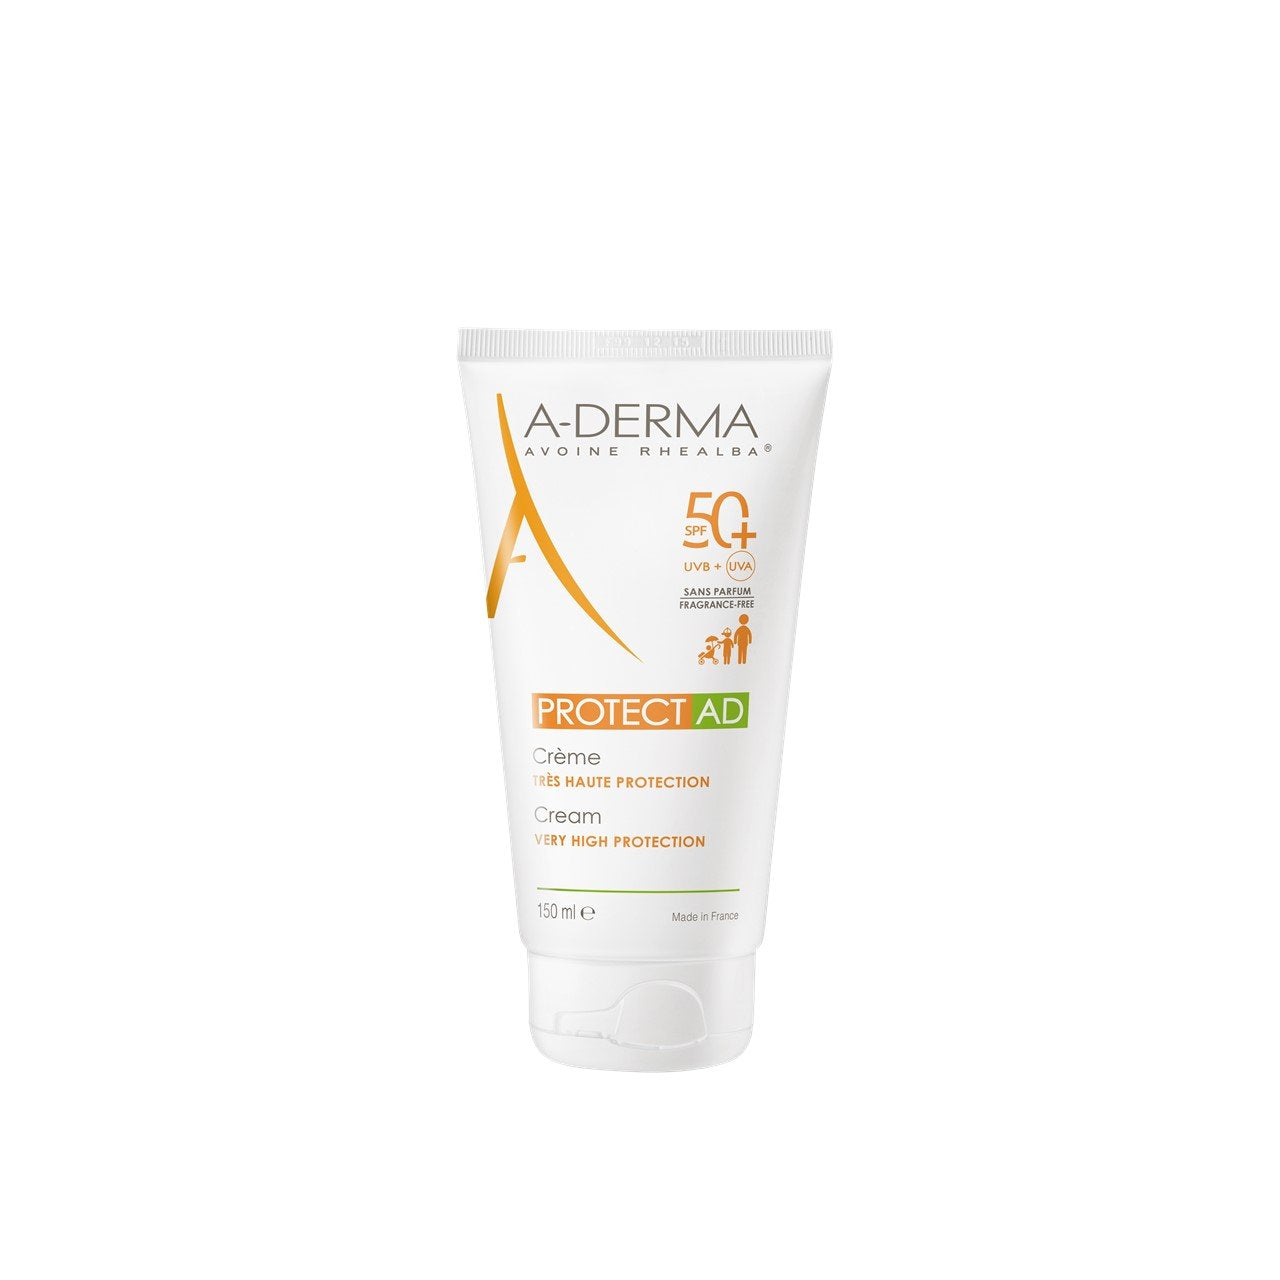 A-Derma Protect AD High Protection Cream SPF50+ 150ml